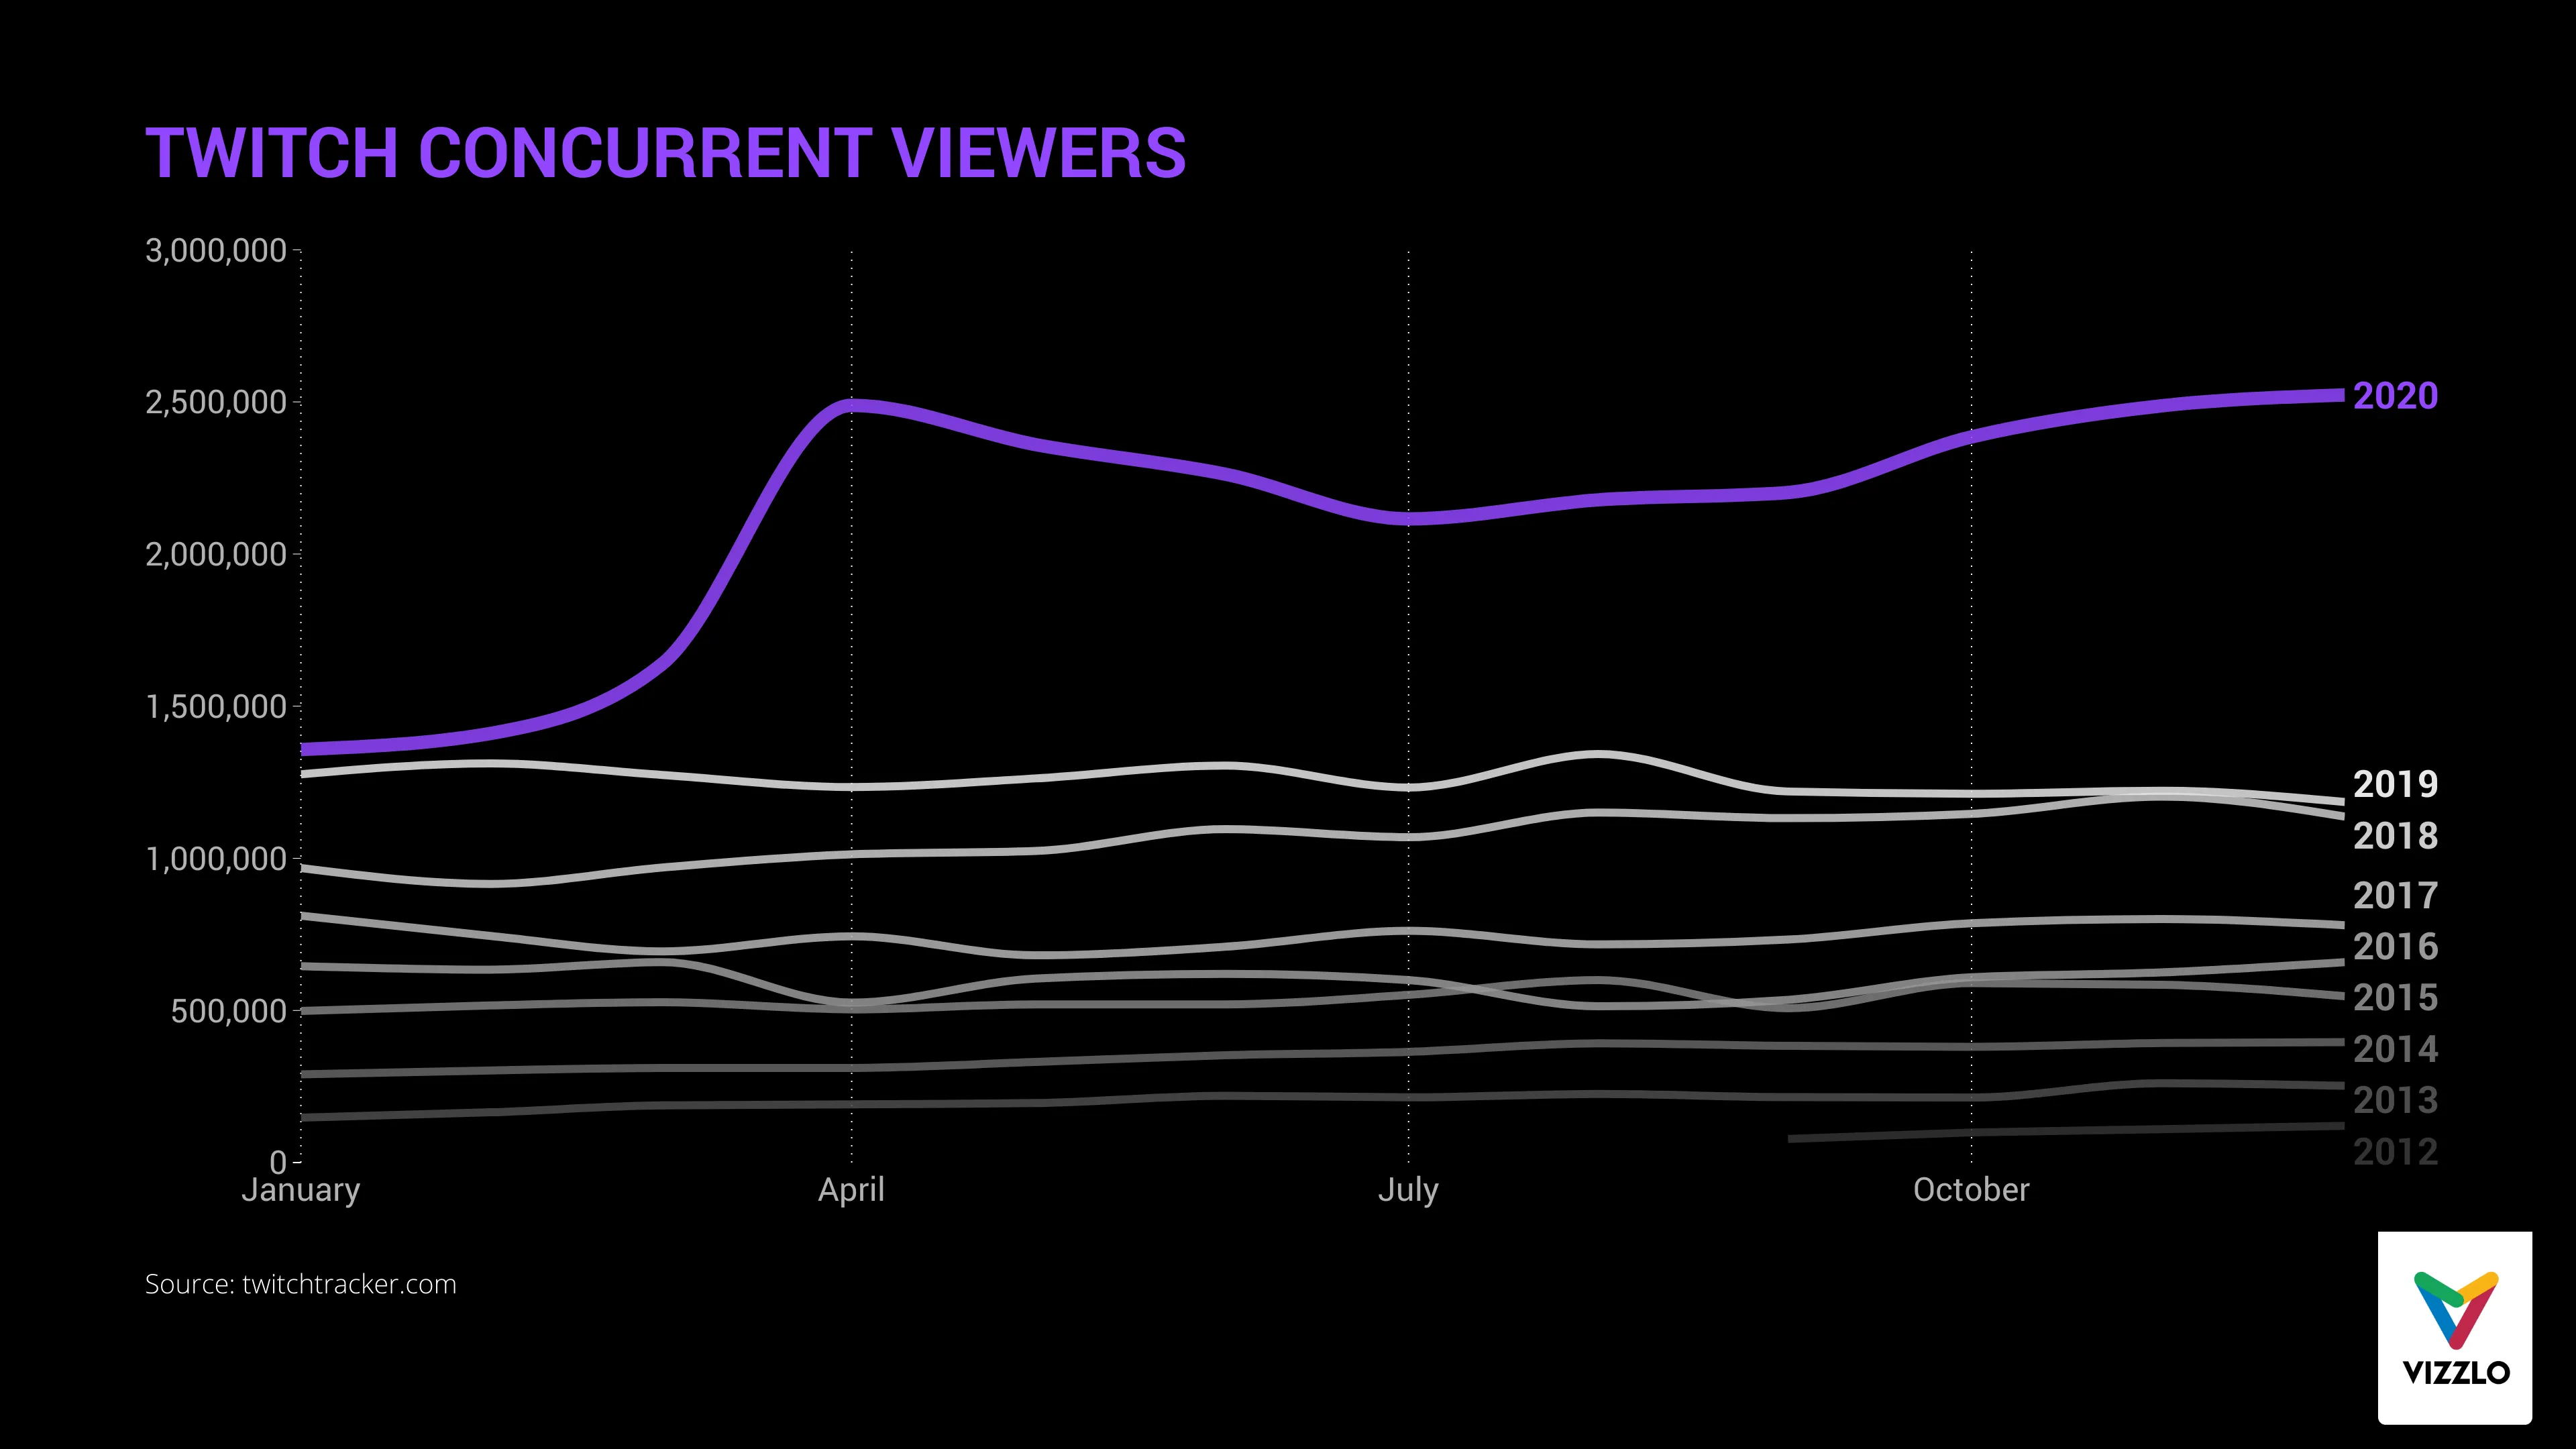 TWITCH CONCURRENT VIEWERS